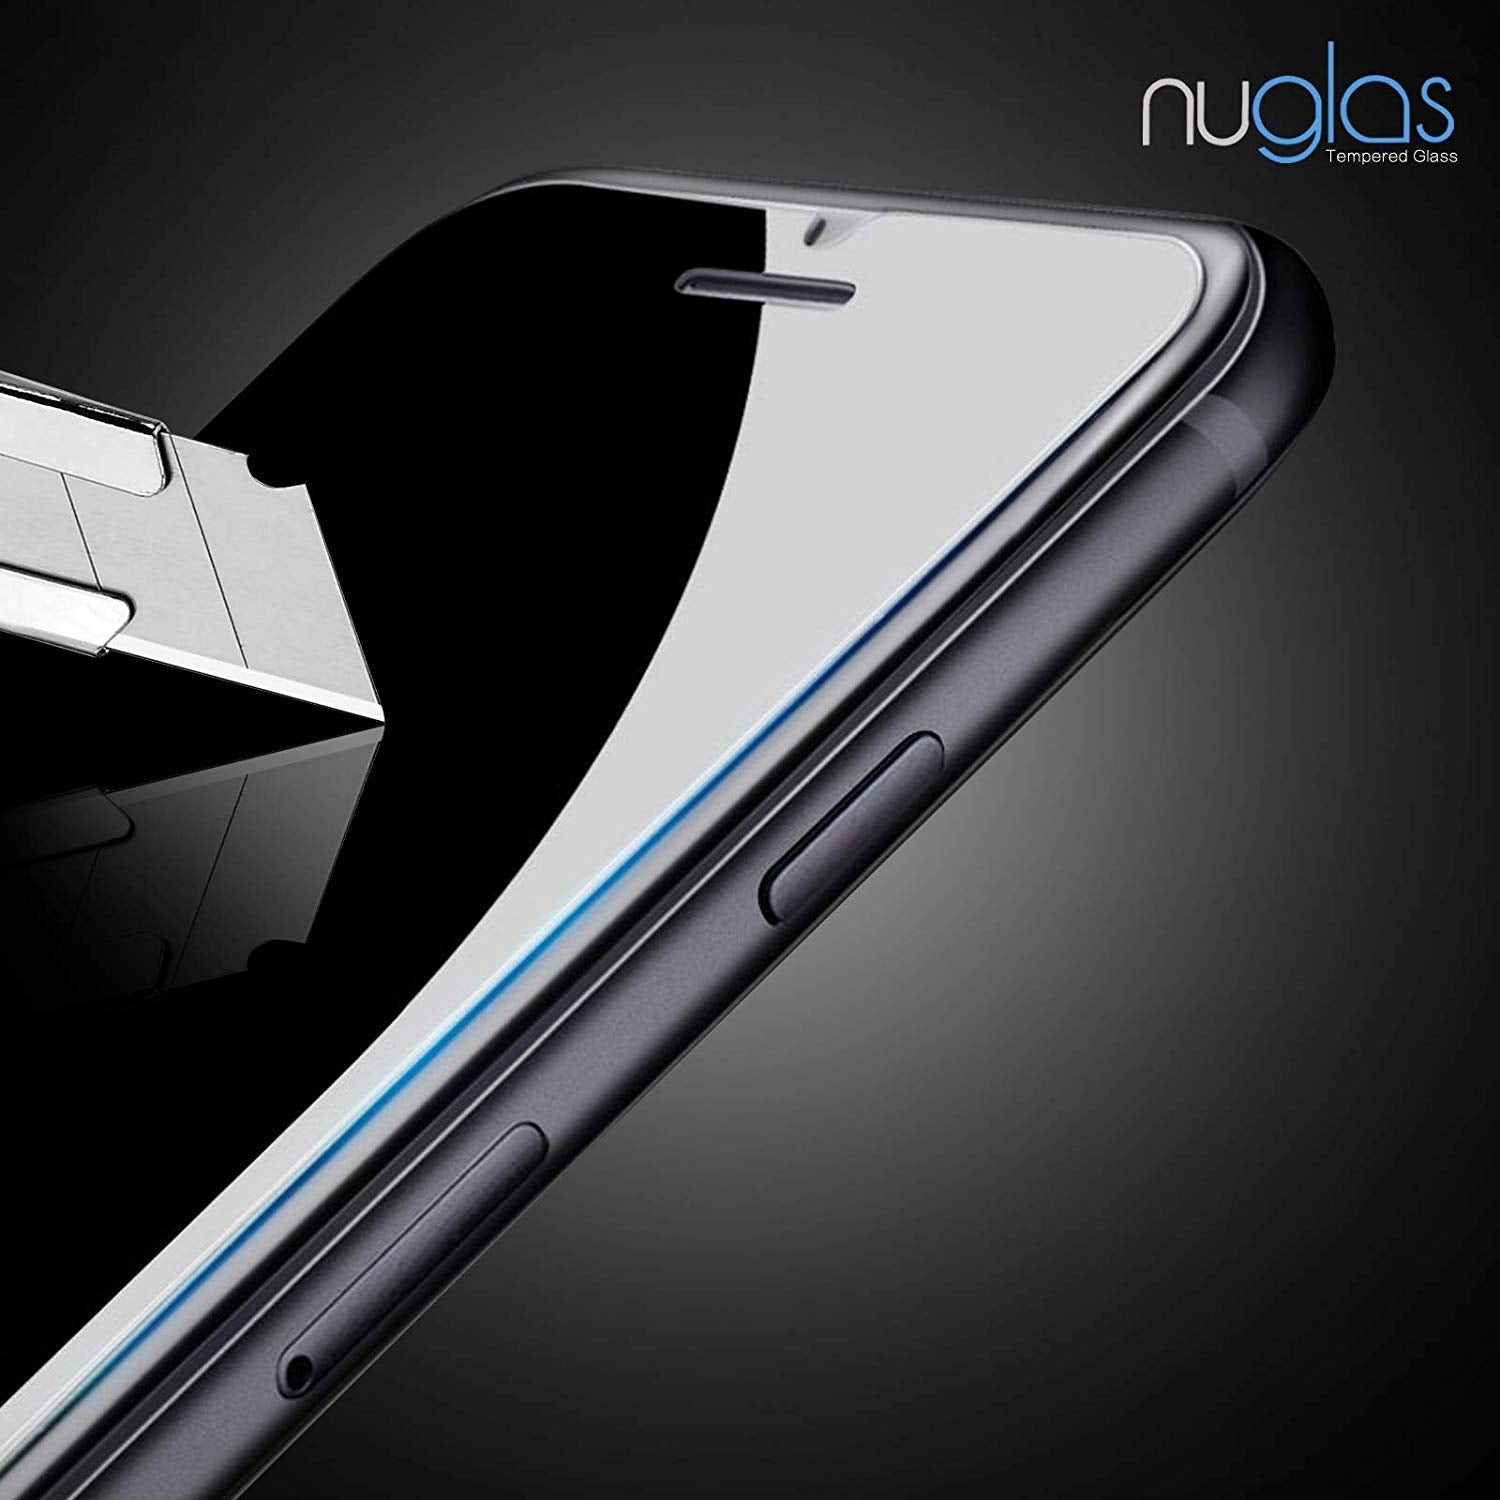 NuGlas Tempered Glass Screen Protector for iPhone 14 Pro Max (6.7